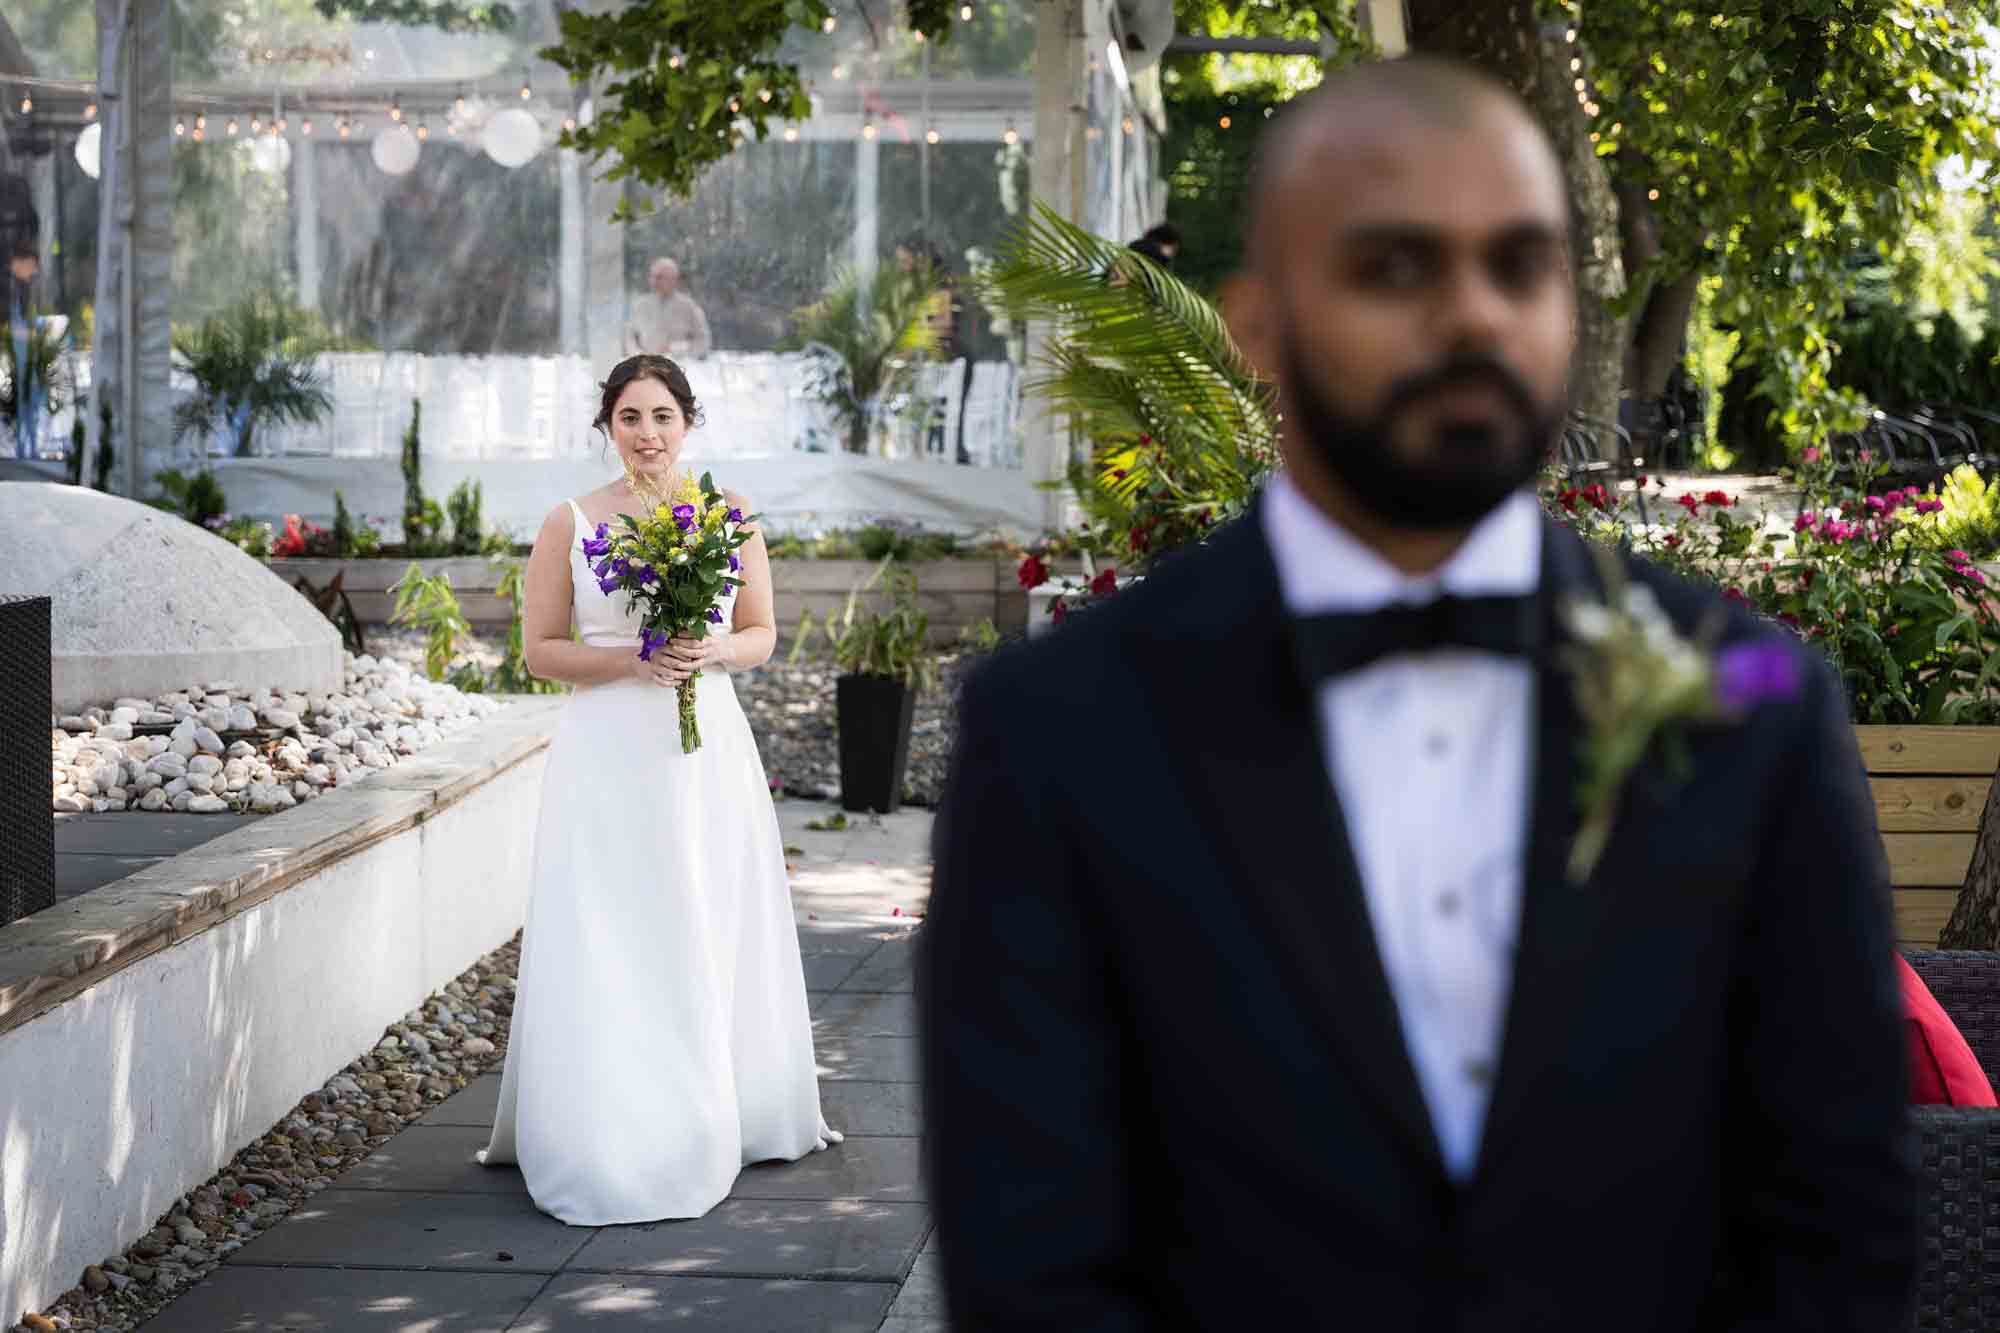 Bride wearing white dress and holding bouquet looking at groom wearing tux in foreground during first look at a Sanctuary Roosevelt Island wedding